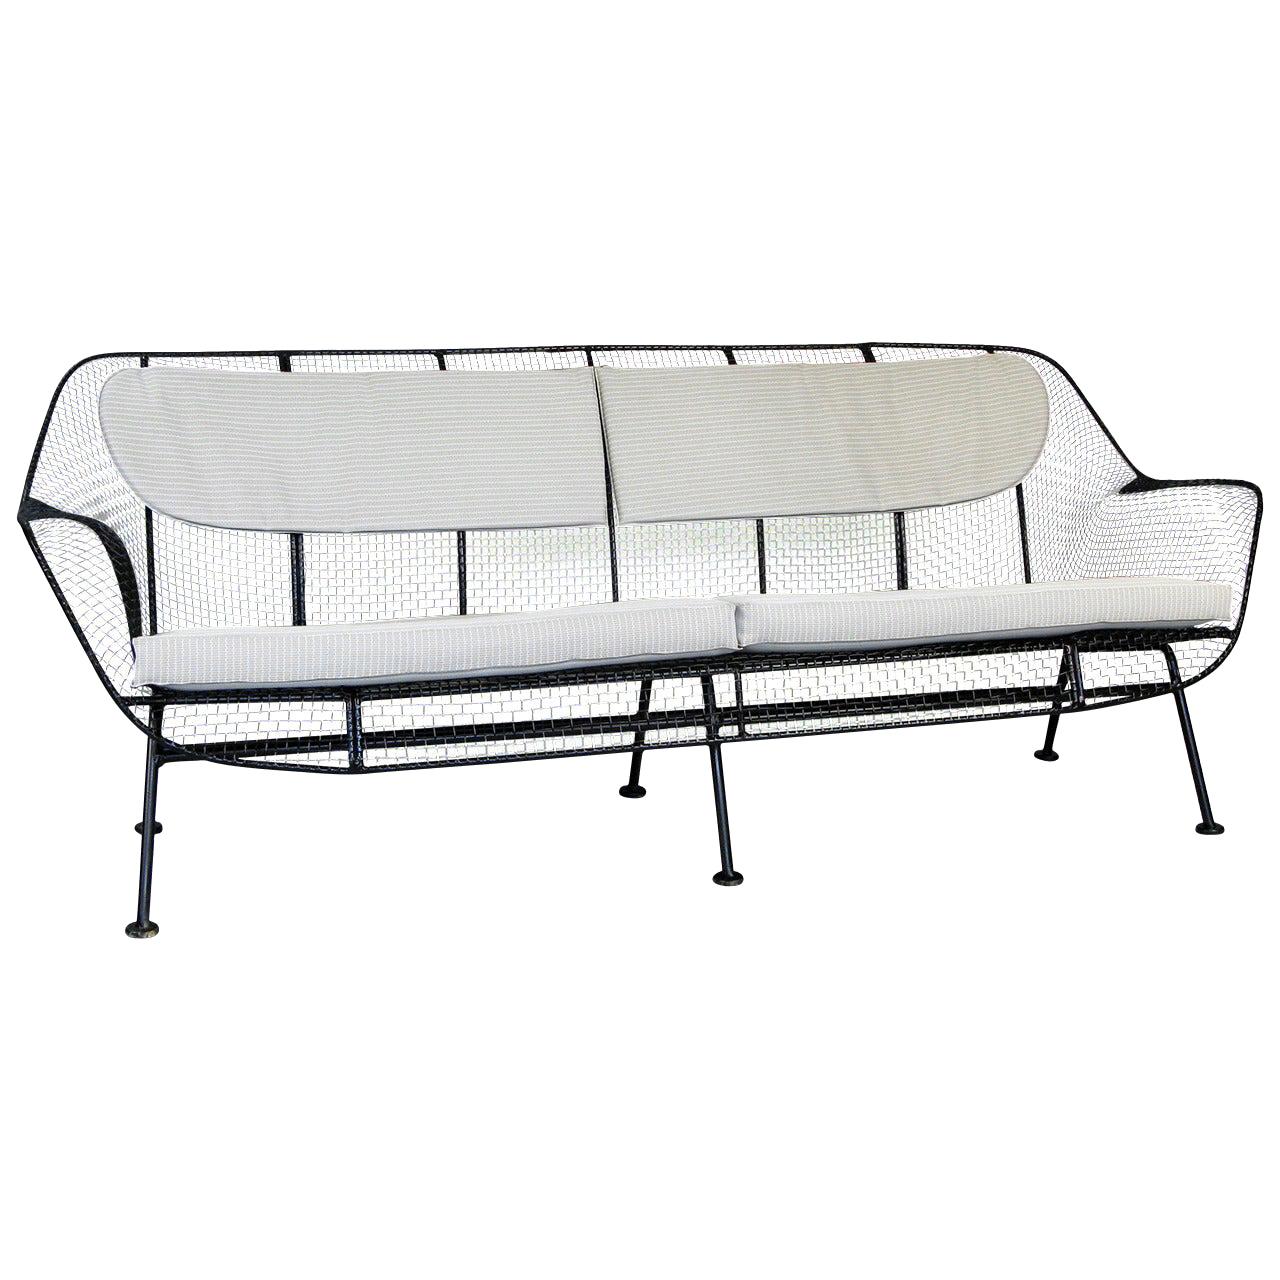 Rare 1950s Sculptura Sofa by Russell Woodard
A rare example of Russell Woodard's iconic sculptura long sofa in wrought iron and woven steel mesh. Beautiful proportions in this wide and deep lounge sofa make this very comfortable and stylish.